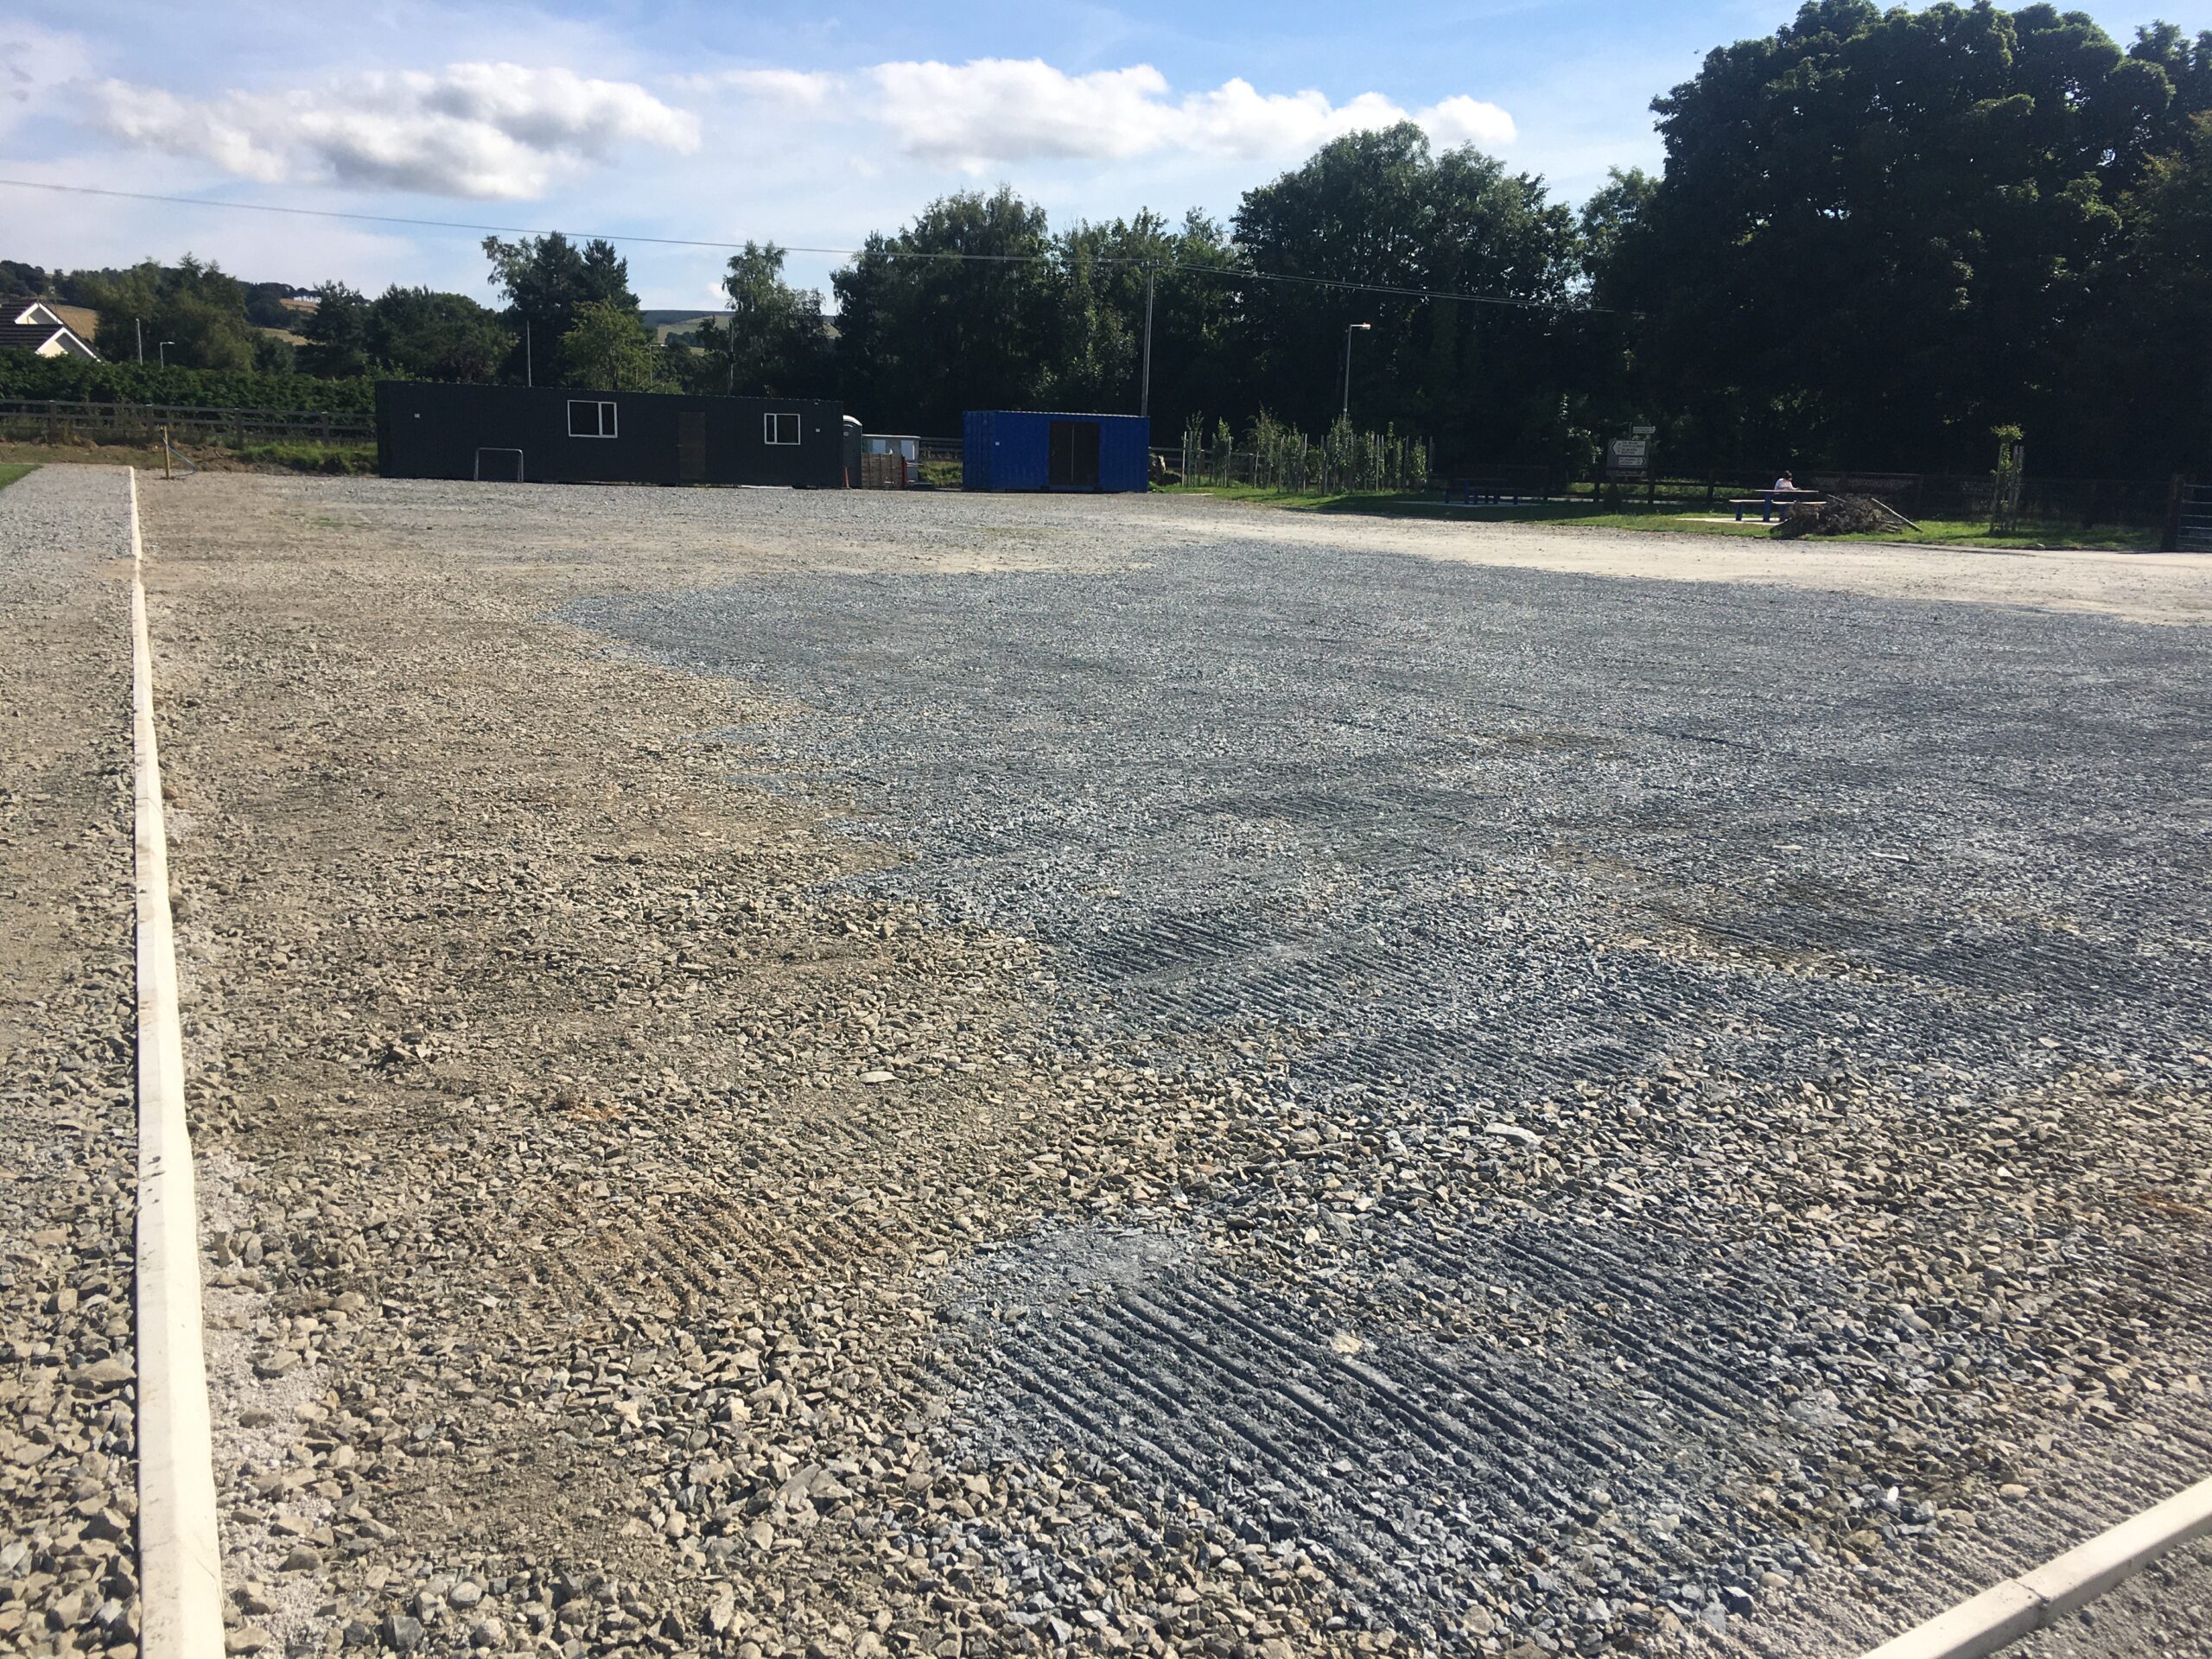 What a job...car park, pitch levelled and walking track completed.